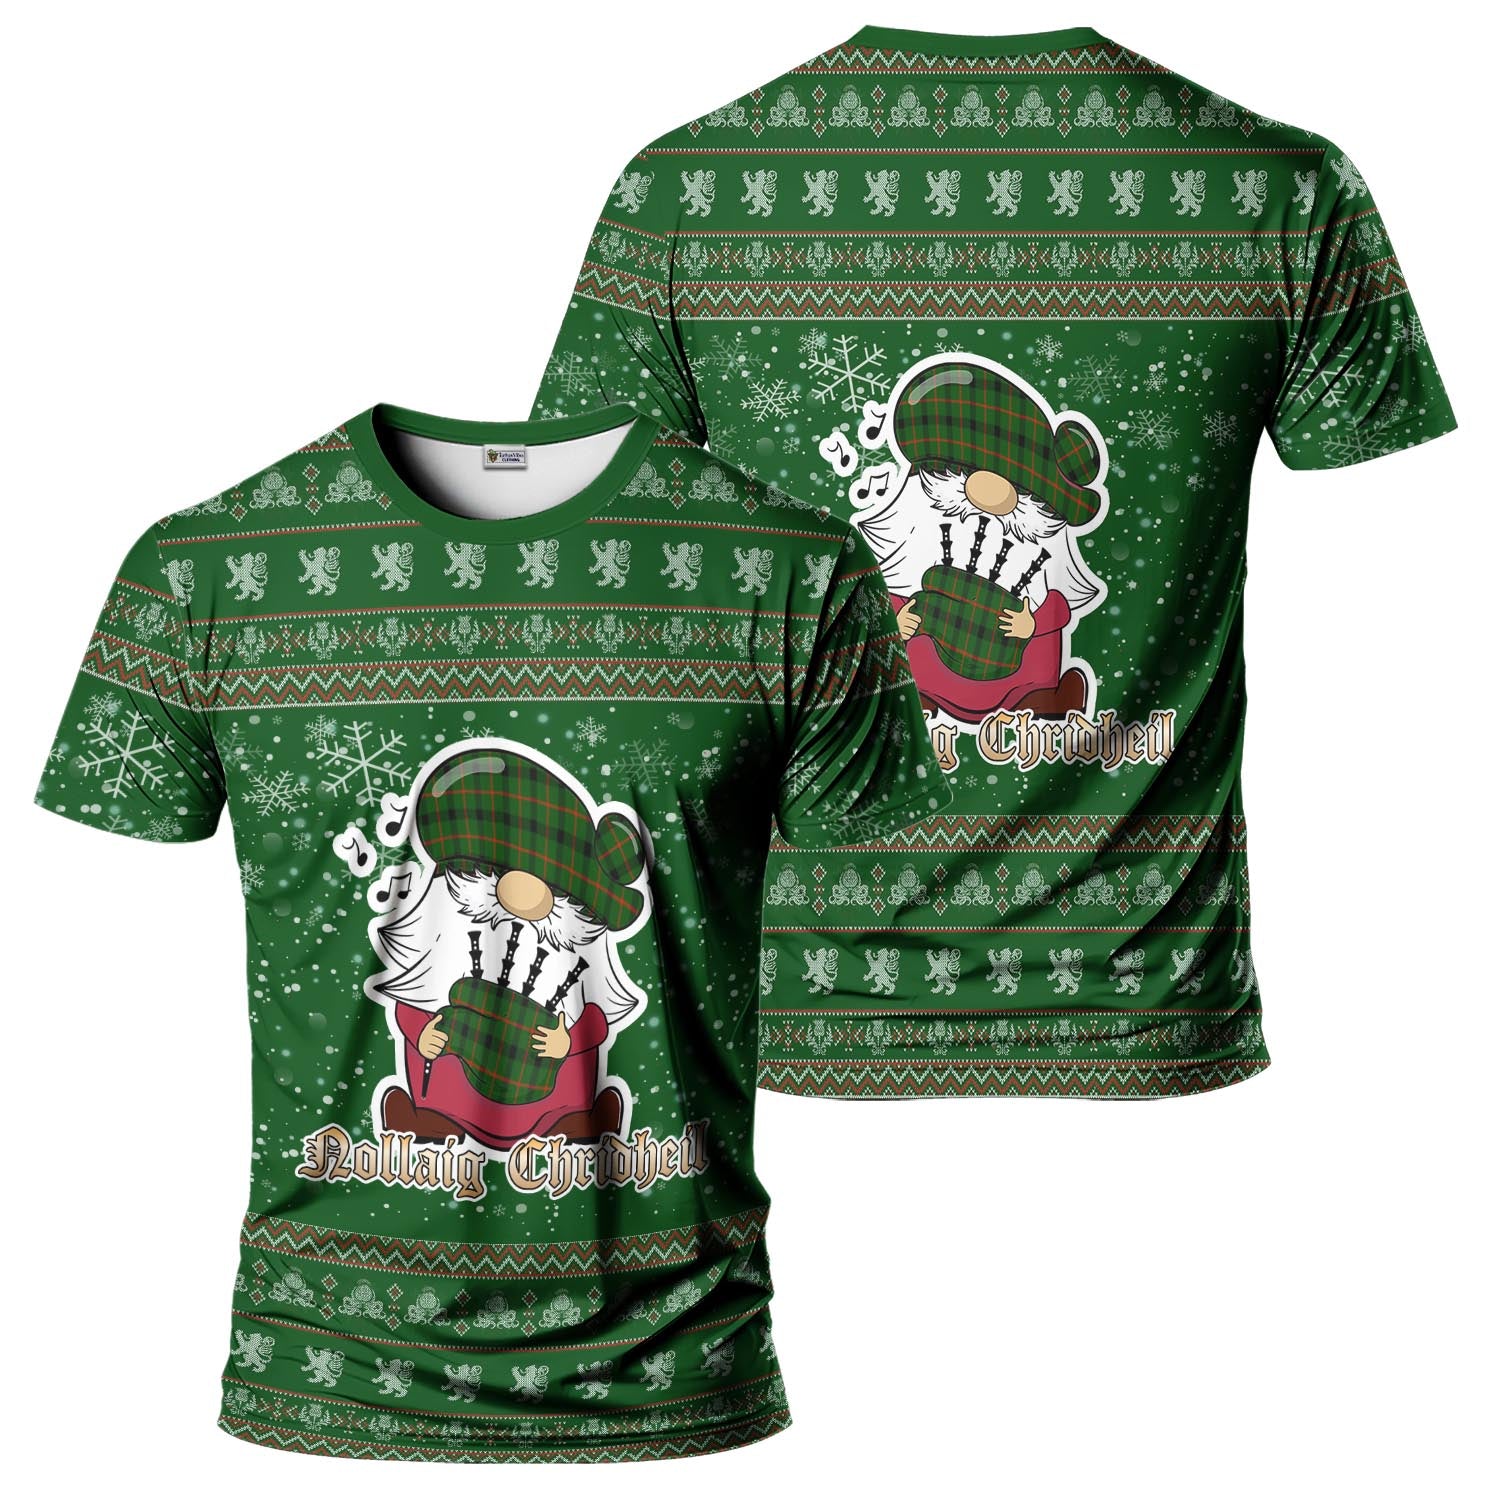 Kincaid Modern Clan Christmas Family T-Shirt with Funny Gnome Playing Bagpipes Men's Shirt Green - Tartanvibesclothing